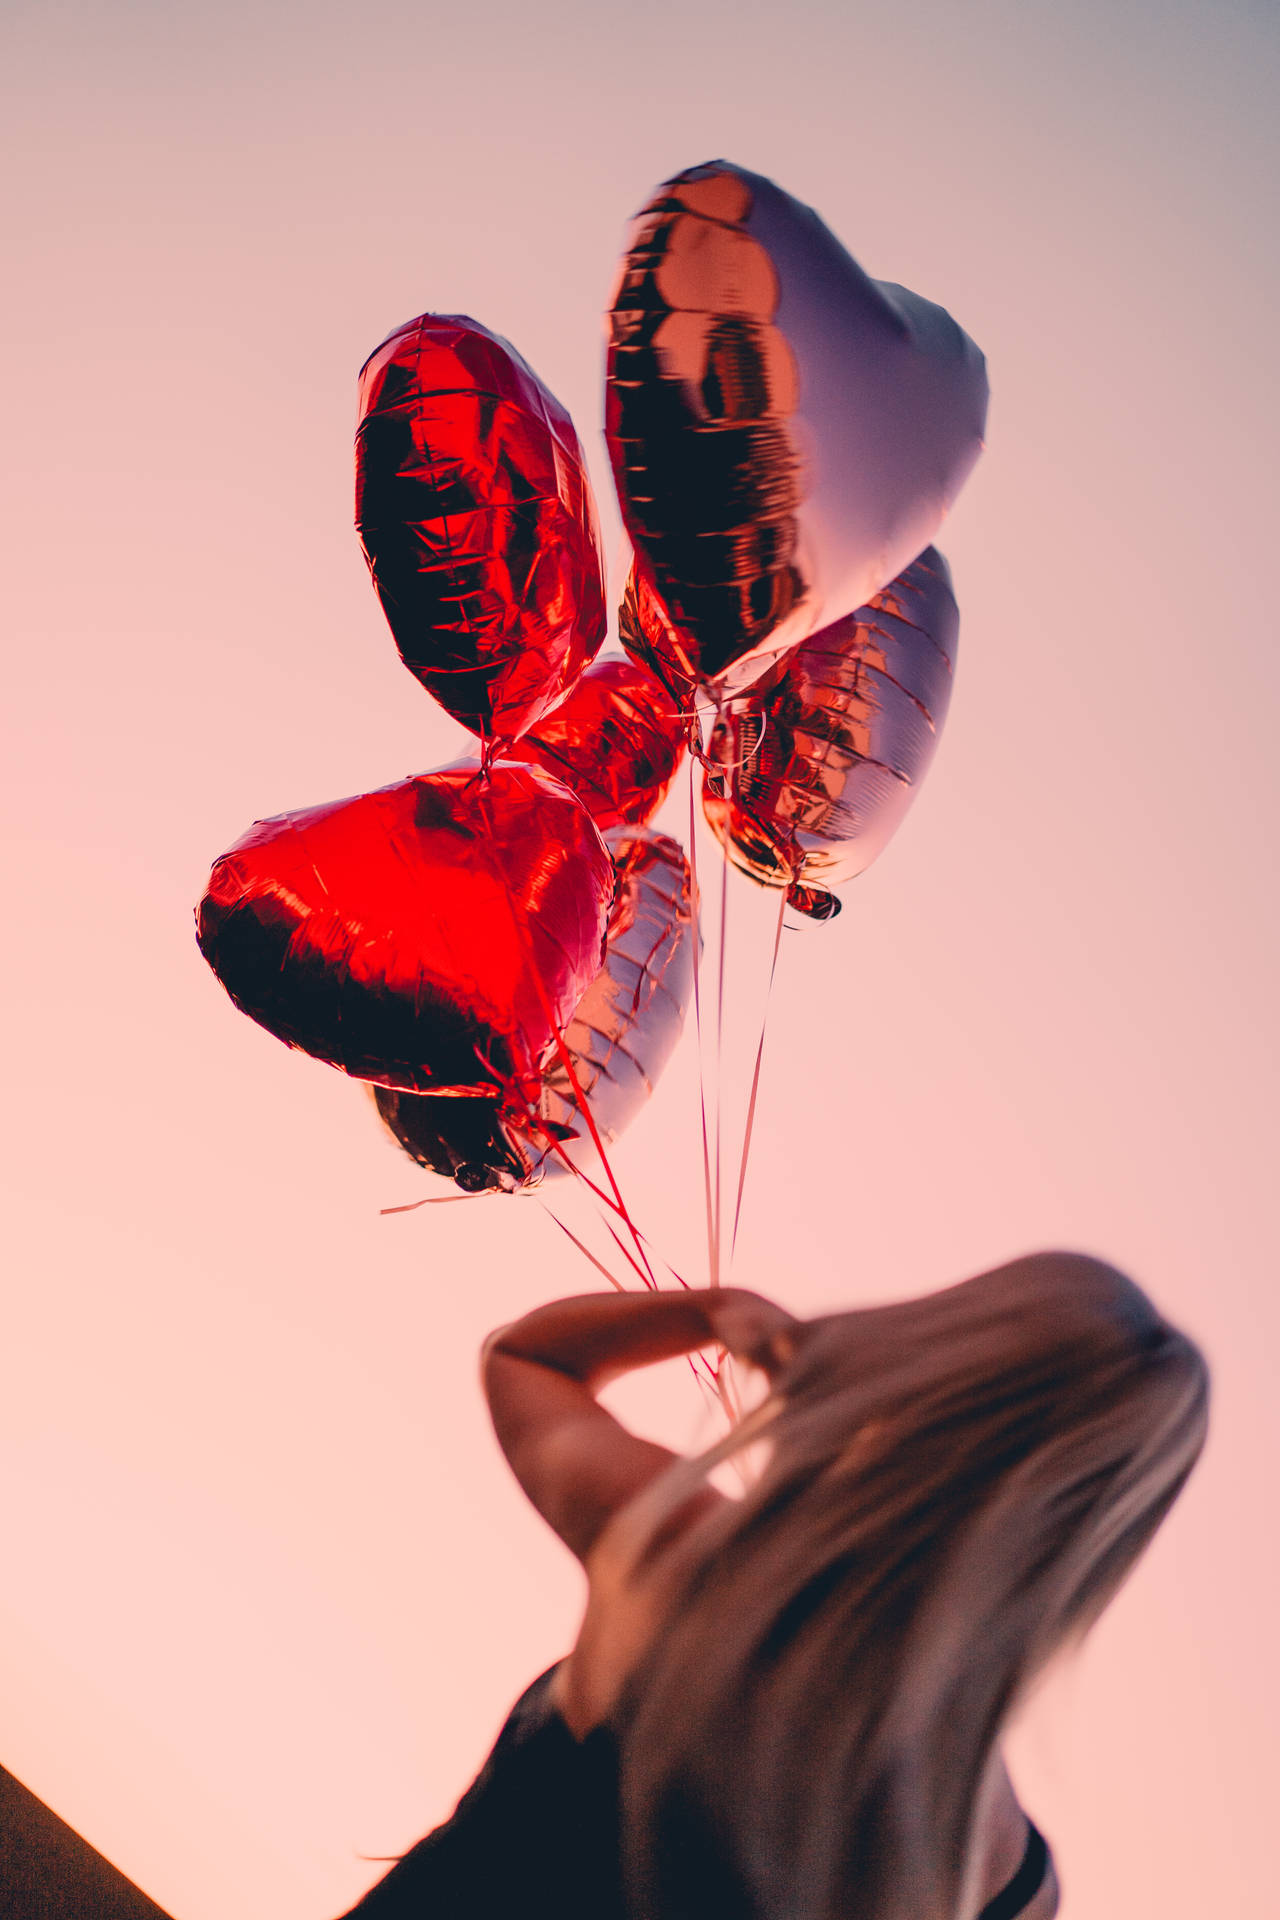 Cute Love Girl With Red Balloons Wallpaper